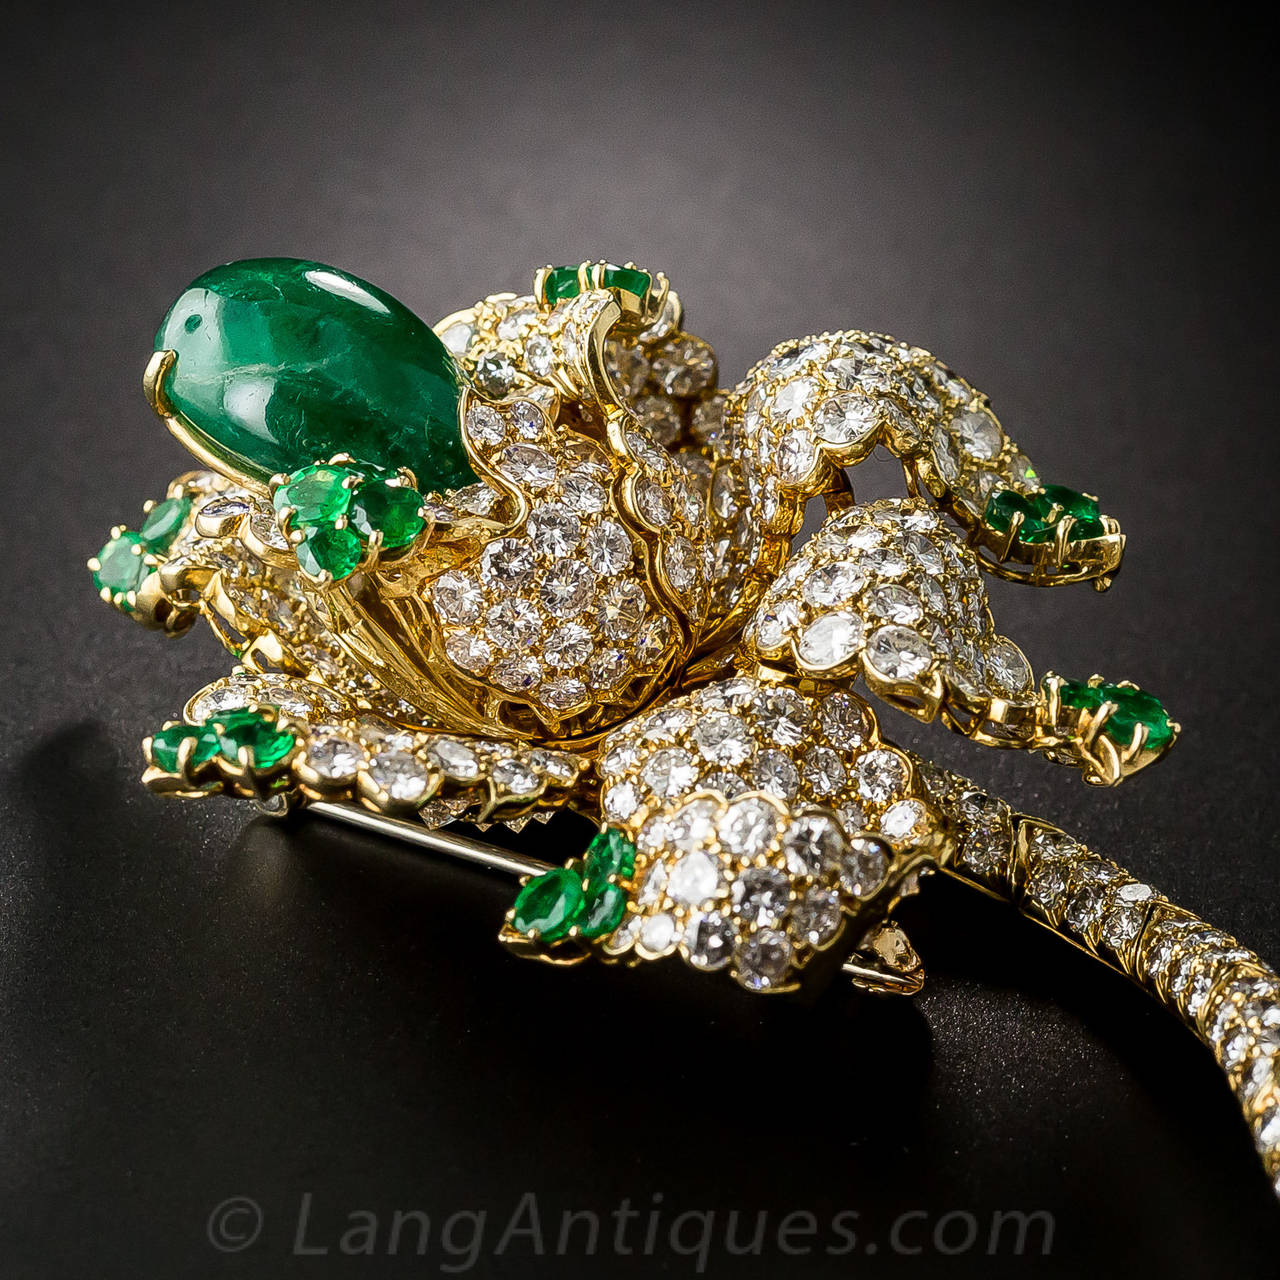 Spectacular 12 Carat Cabochon Emerald Diamond Gold Flower Brooch For Sale 5